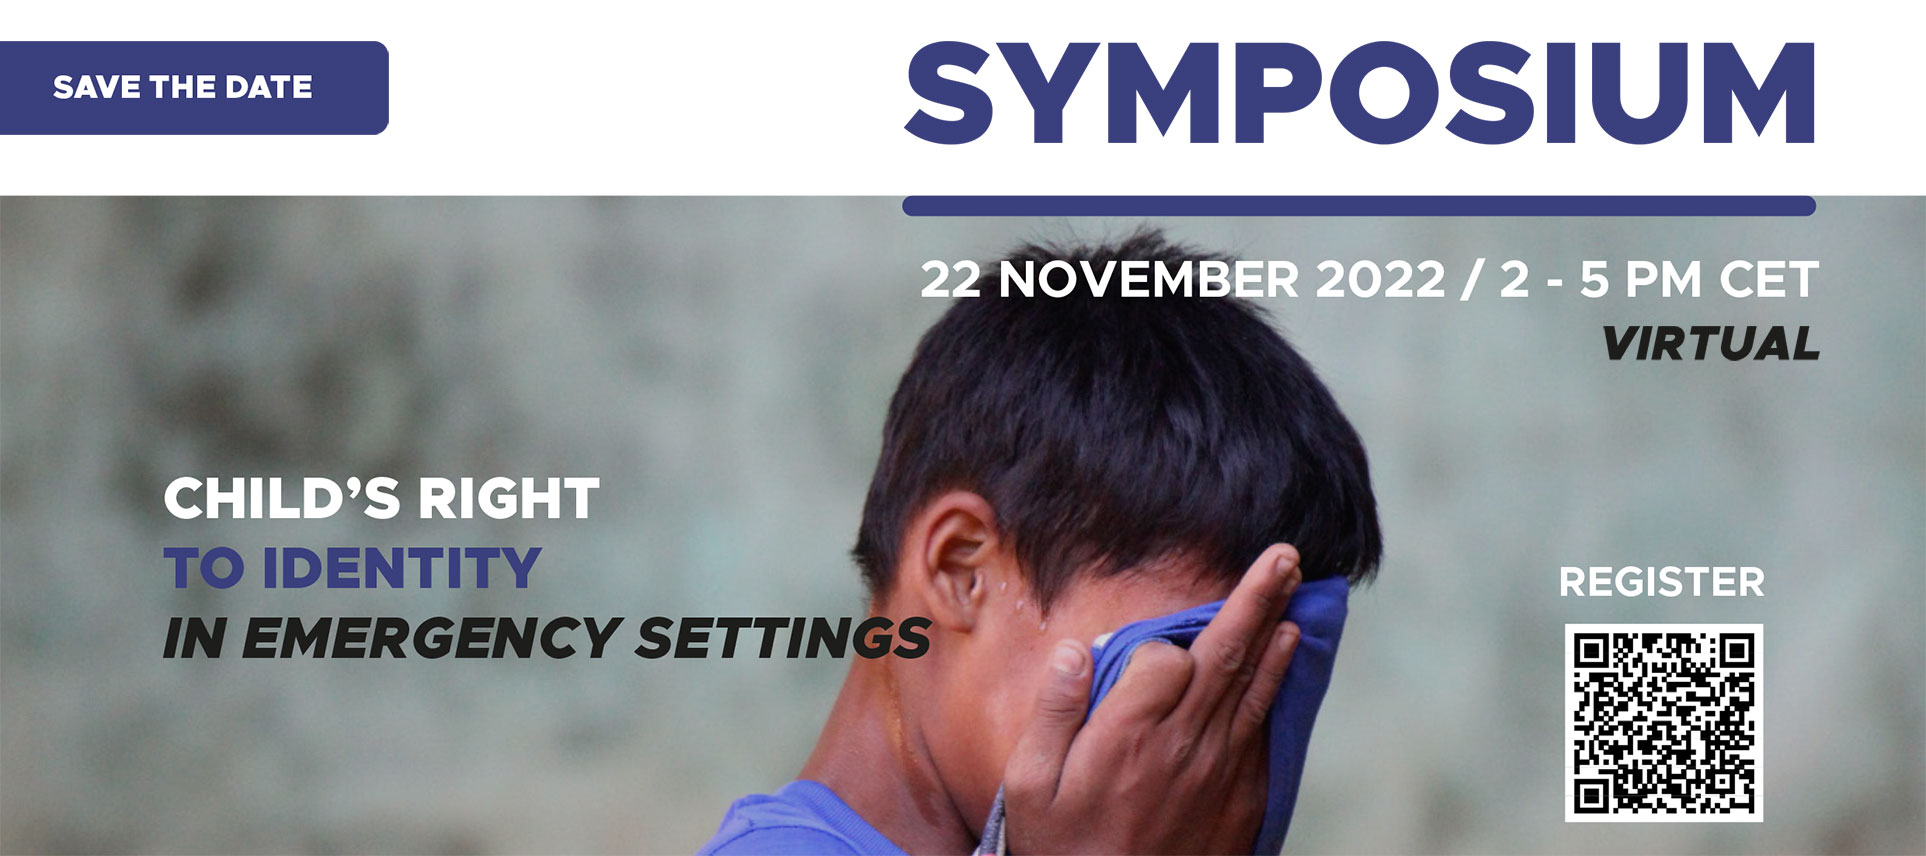 22 November 2022: Virtual Symposium - Child's Right to Identity in Emergency Settings